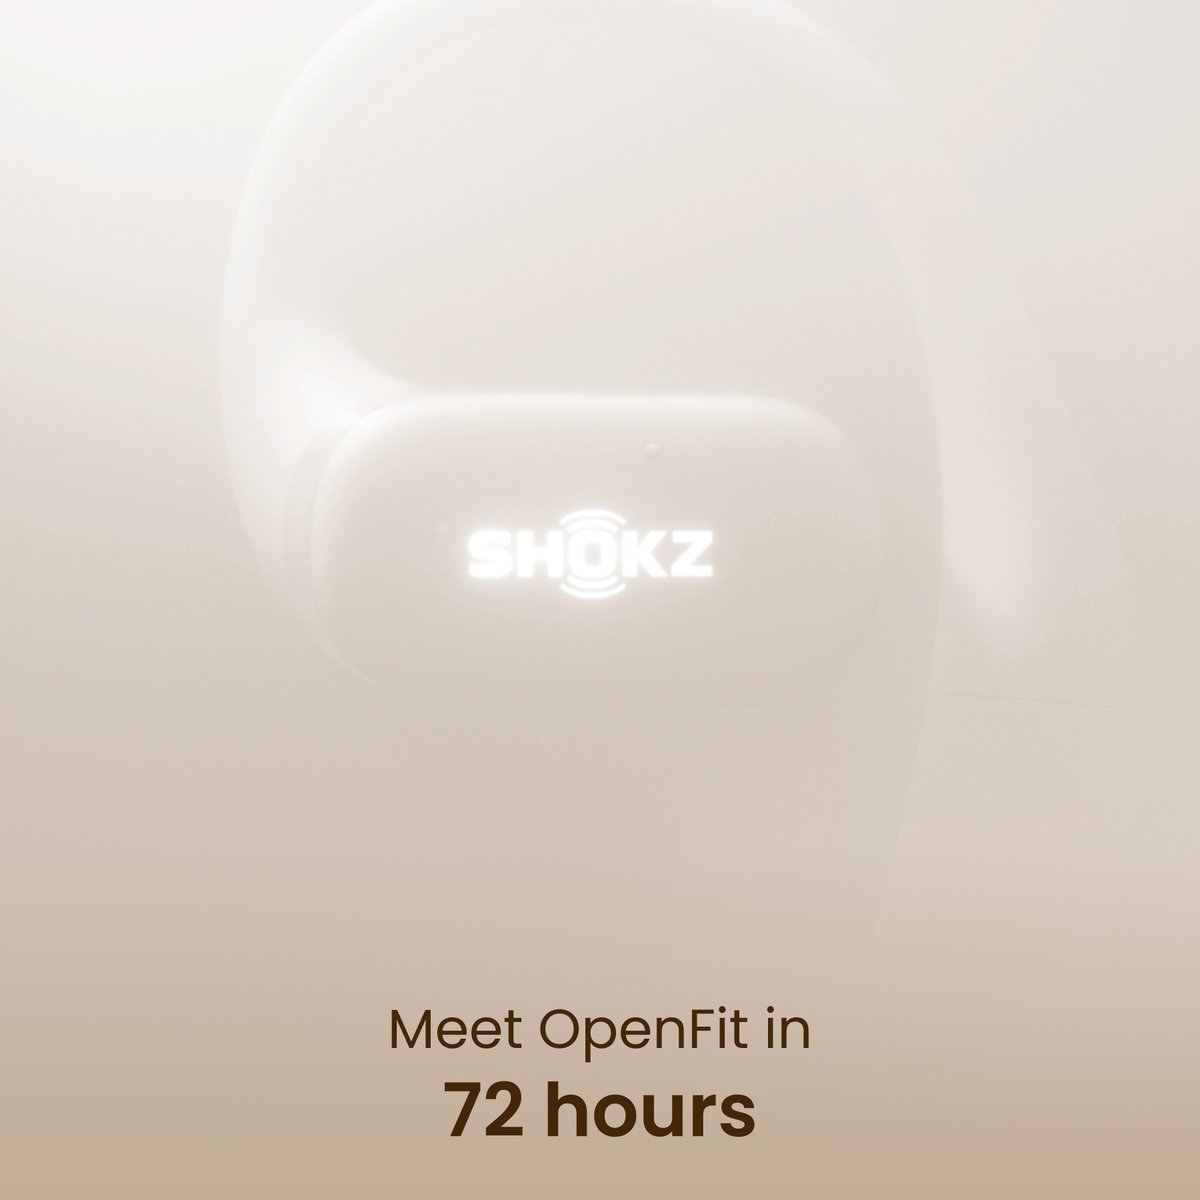 The brand new earbuds Shokz OpenFit is coming in 72 hours. Get ready for an unparalleled comfortable listening experience! uk.shokz.com/?utm_source=ac… #shokz #shokzuk #myshokz #BeOpen #Openear #Openfit